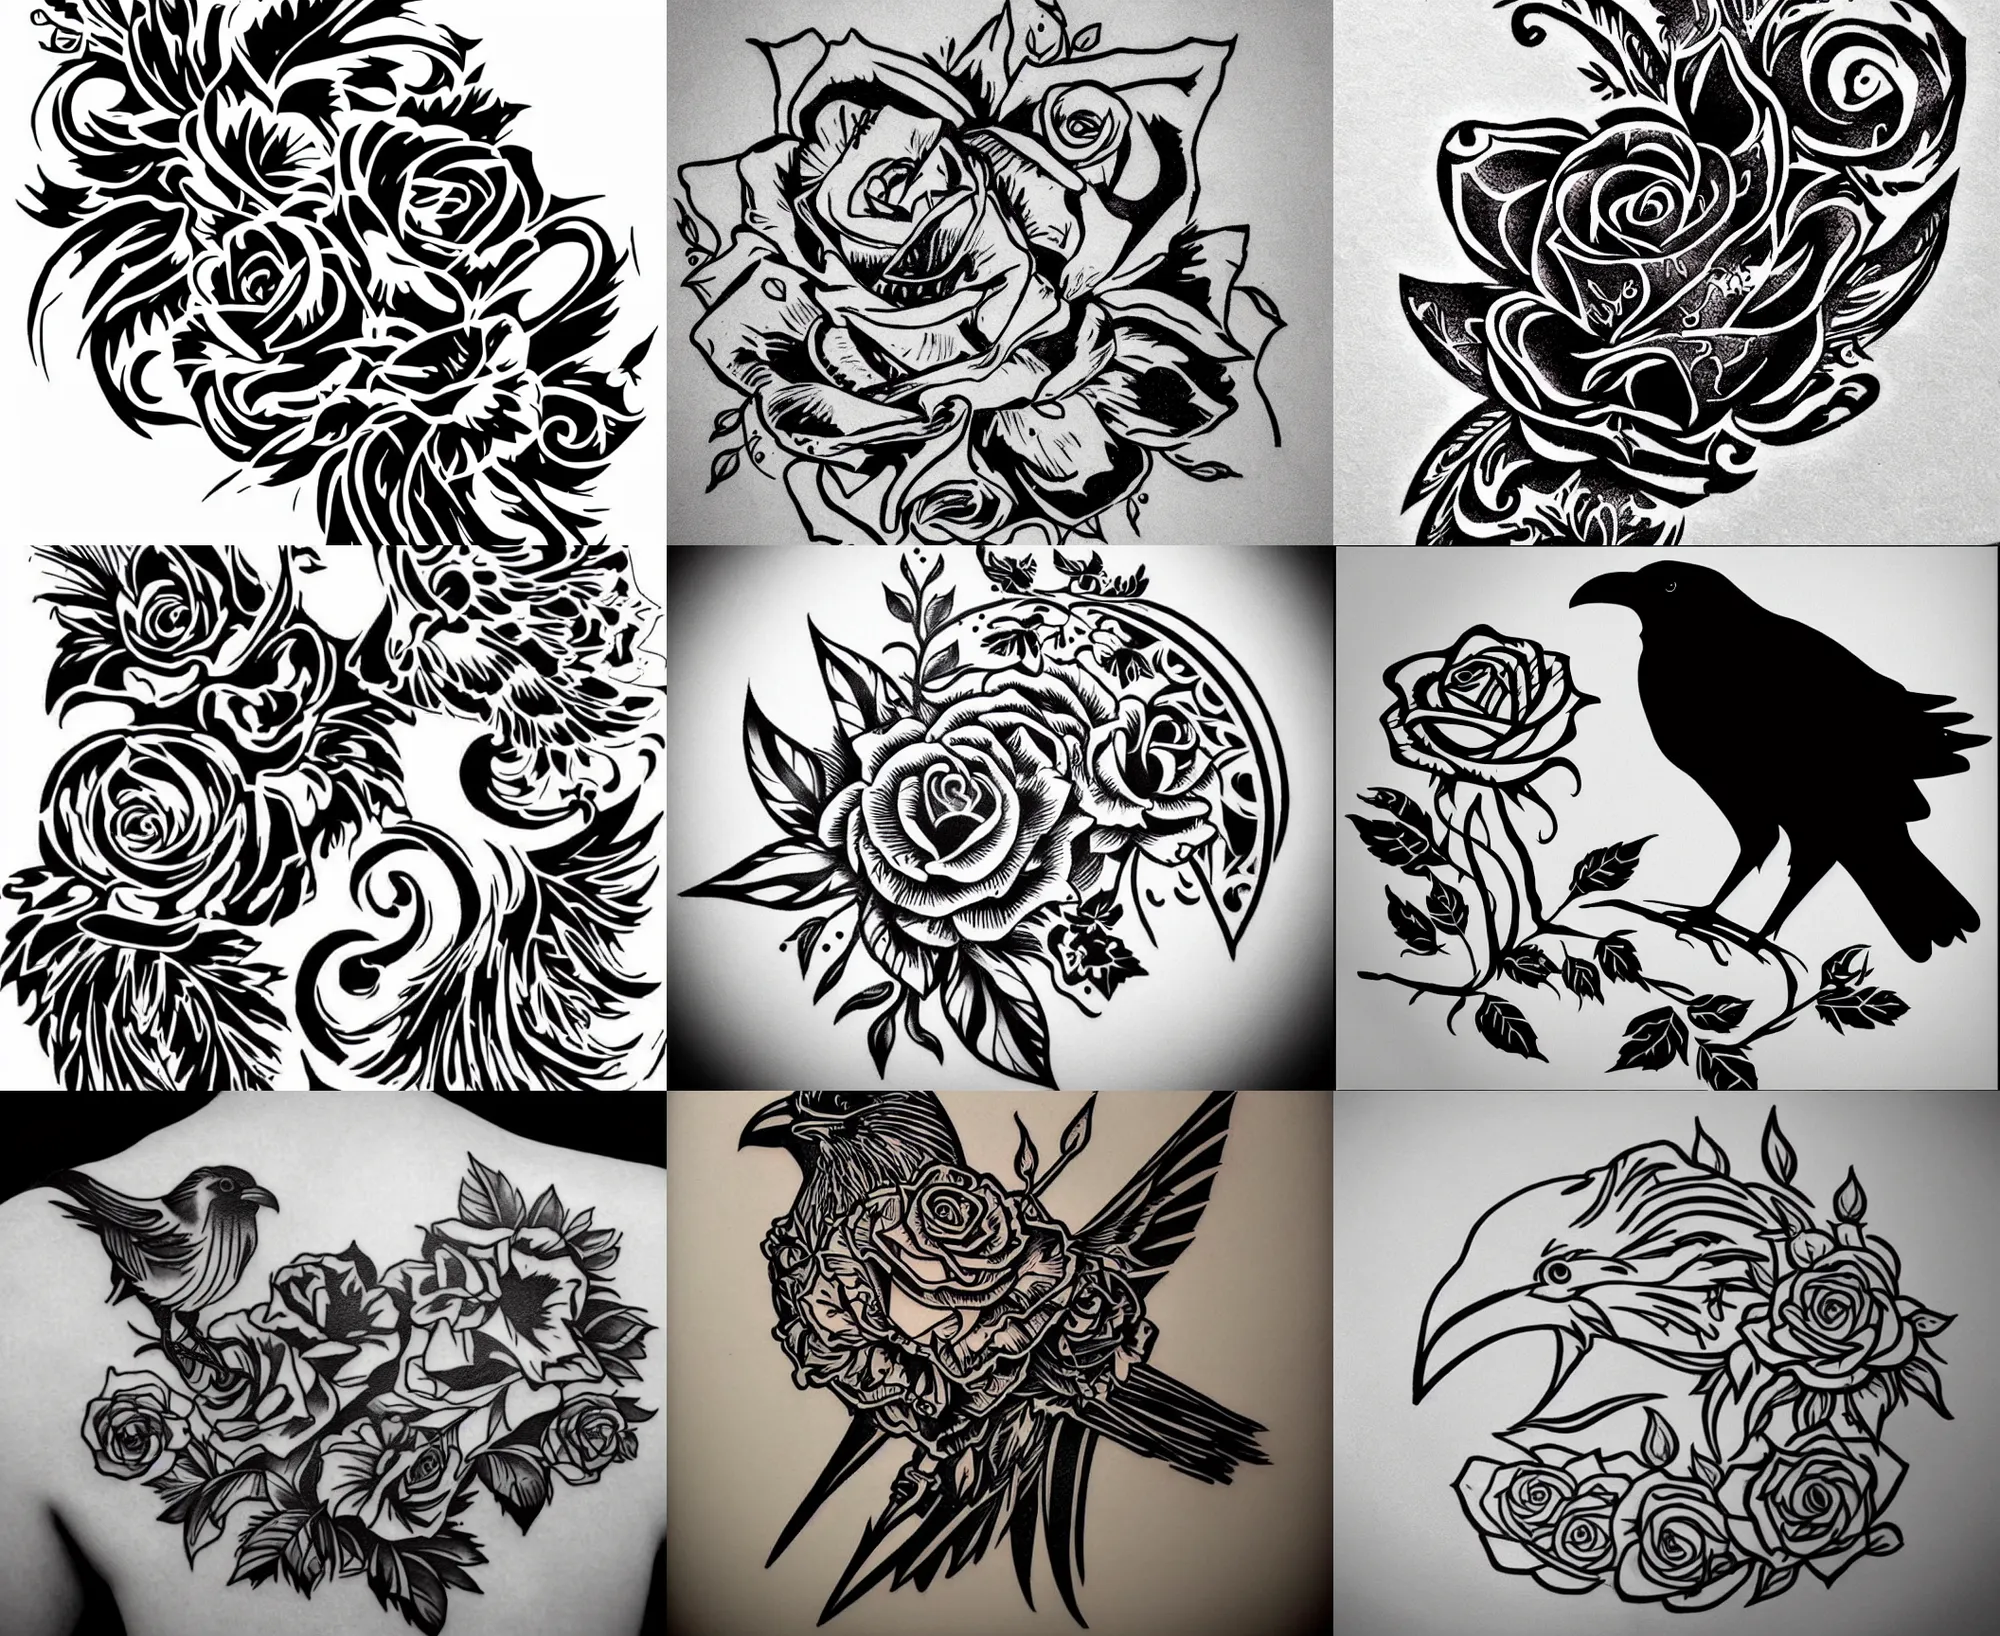 38 Bold And Masculine Rose Tattoo Designs For Men To Express Their Style